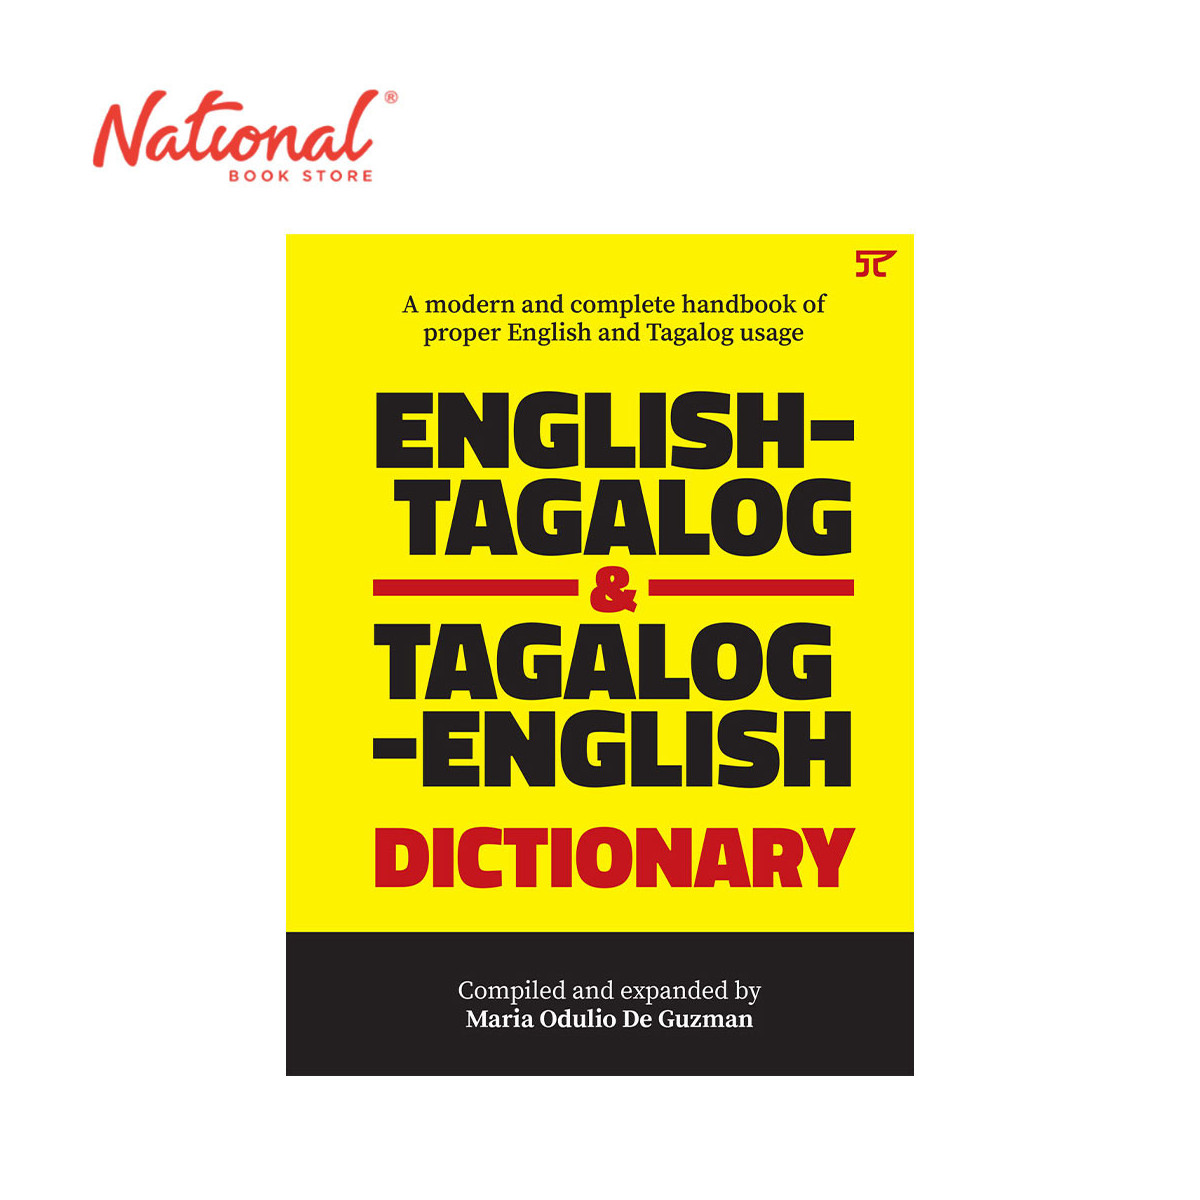 English-Tagalog And Tagalog English Dictionary without Index - Trade Paperback - Reference Books